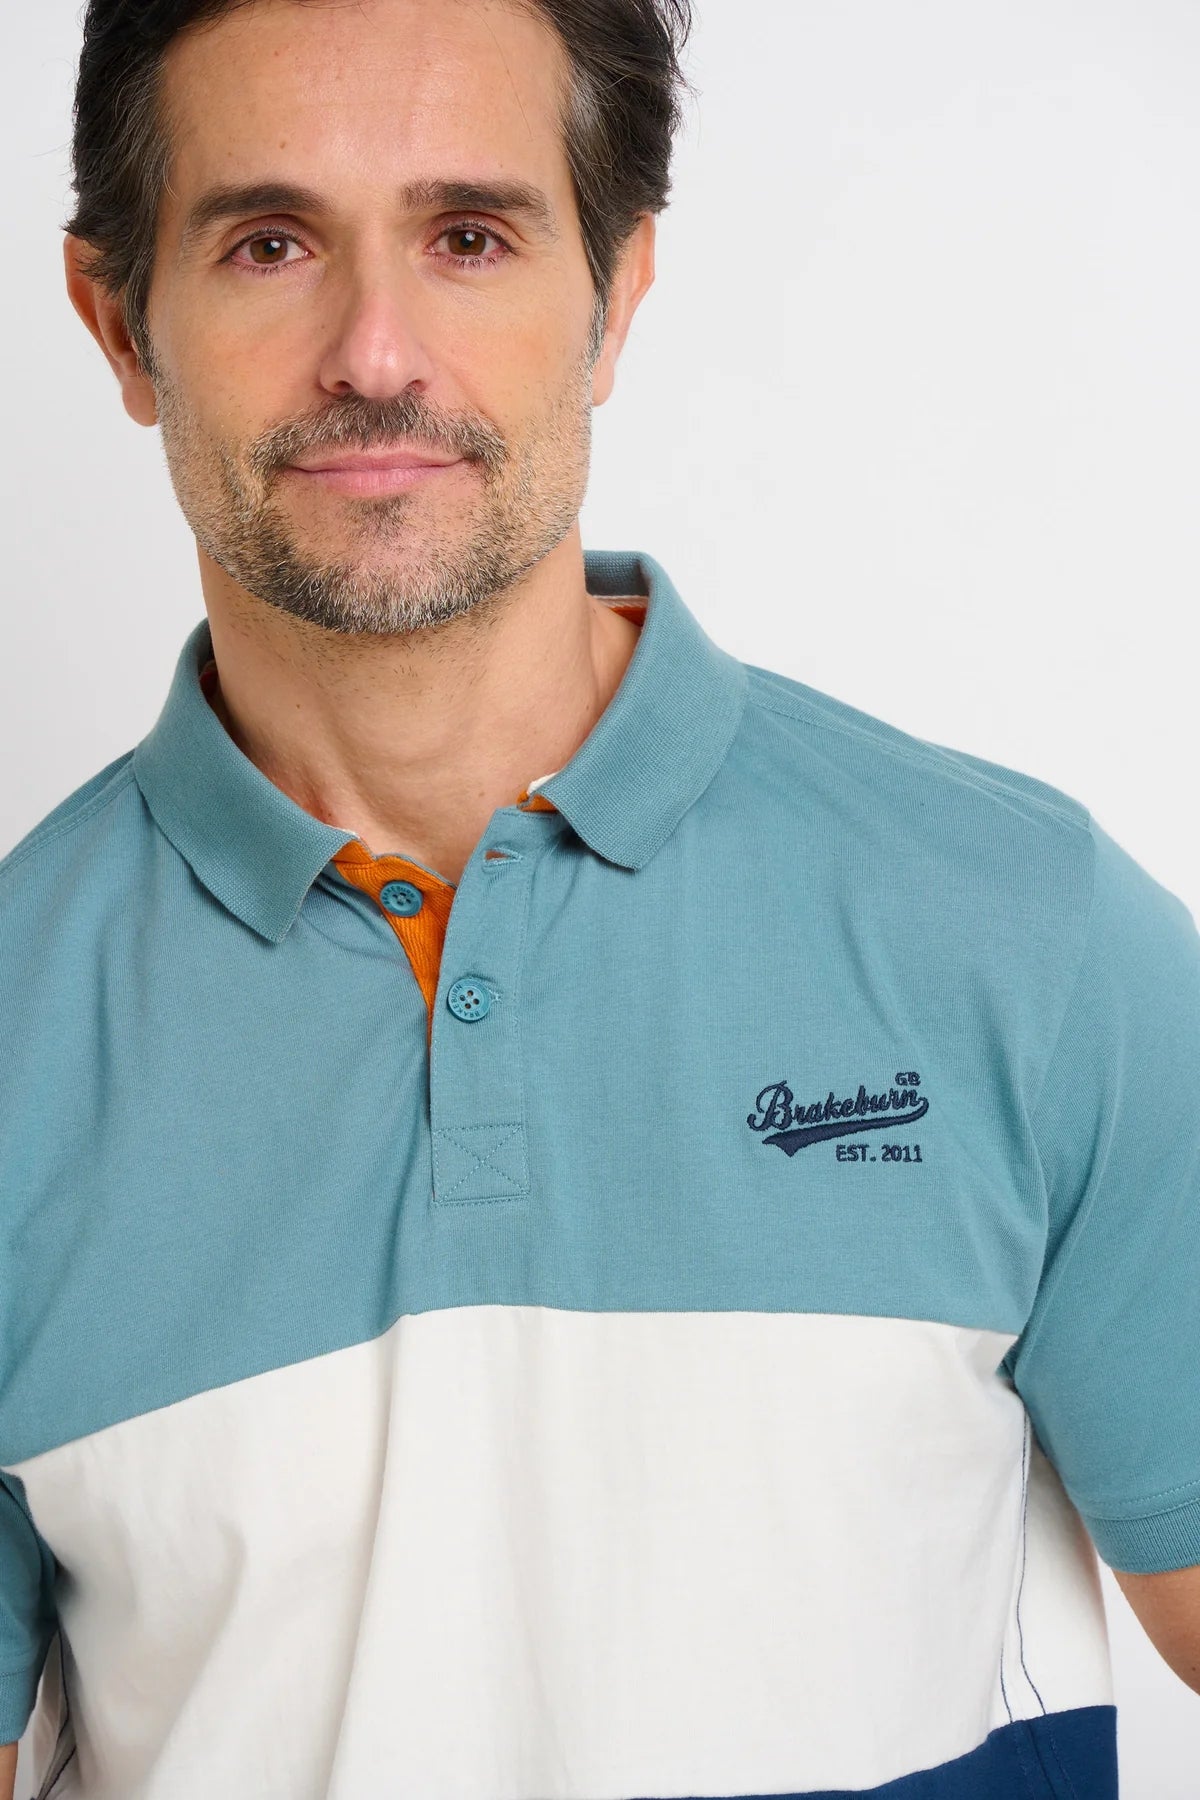 Men's short sleeve polo shirt from Brakeburn in a blue, white and navy colour block style pattern.